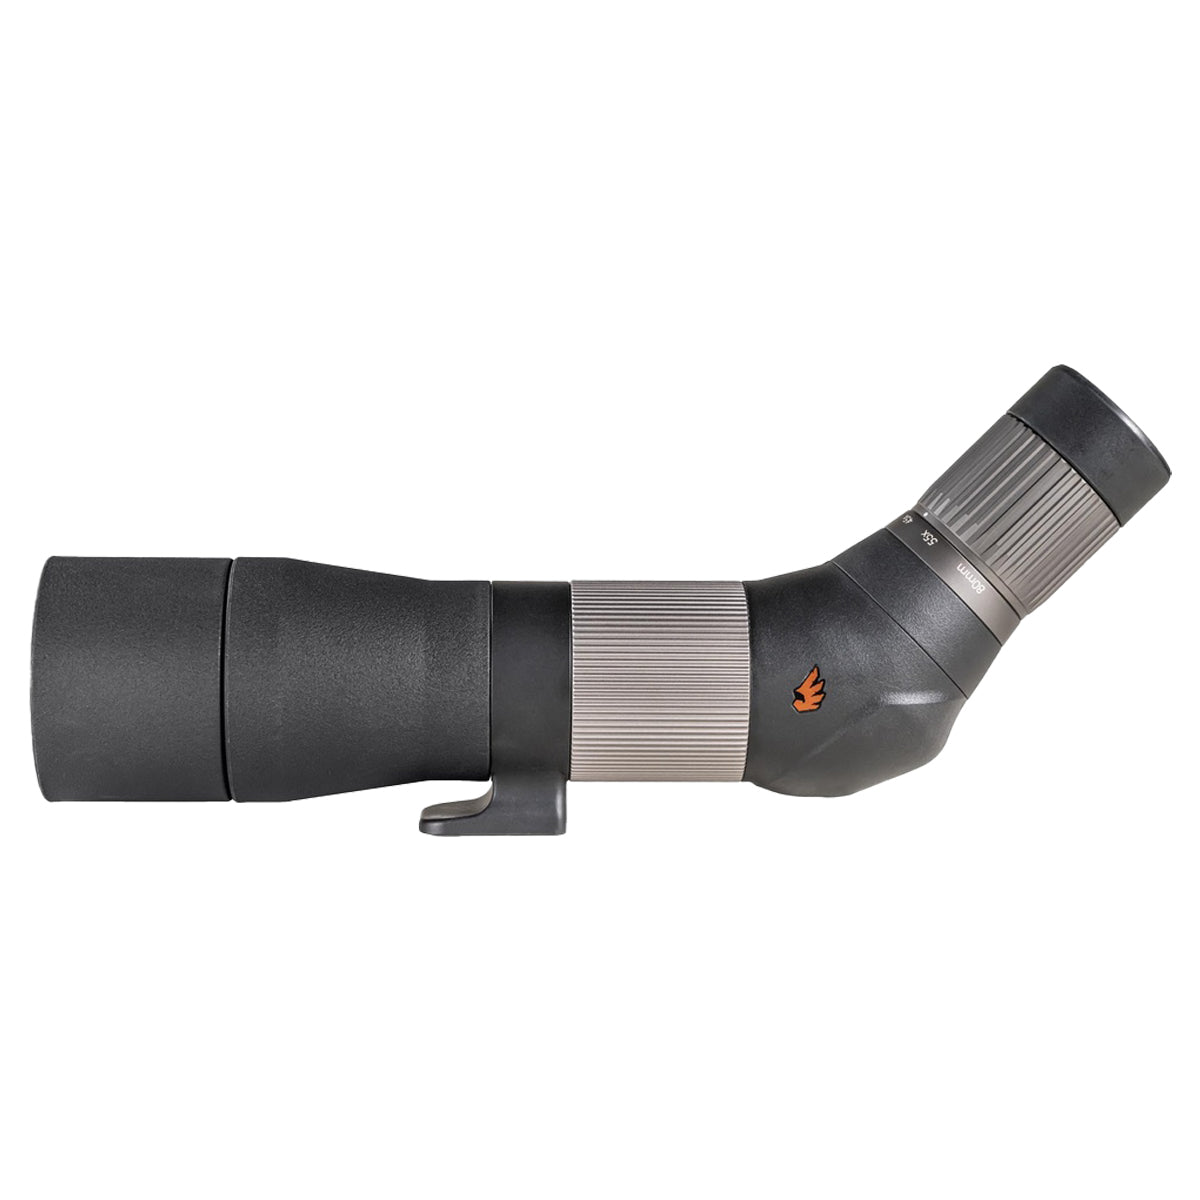 Revic Acura S65a Angled Spotting Scope in  by GOHUNT | Revic - GOHUNT Shop